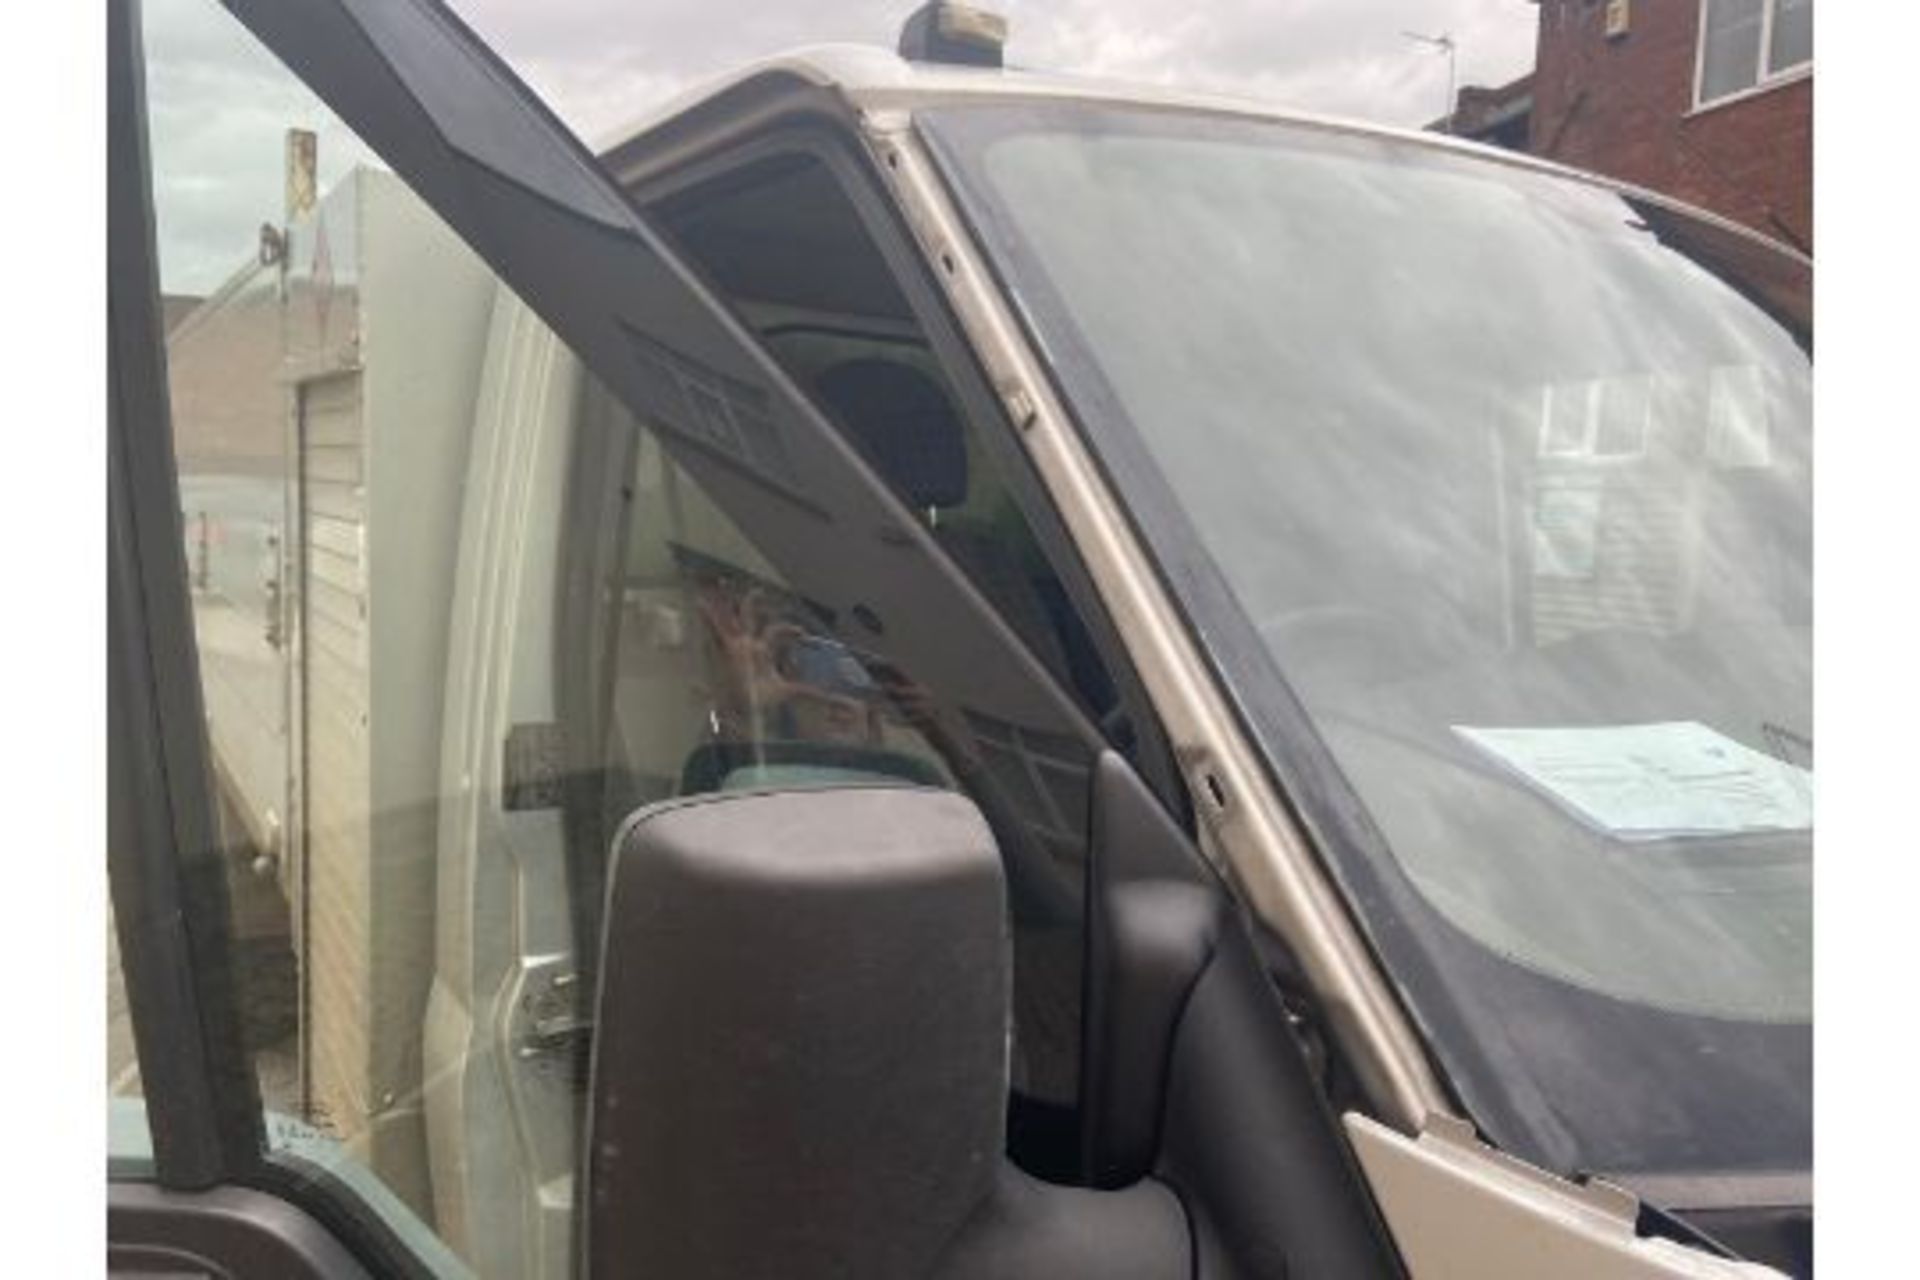 ENTRY DIRECT FROM LOCAL AUTHORITY Ford Transit 100 - Image 11 of 18